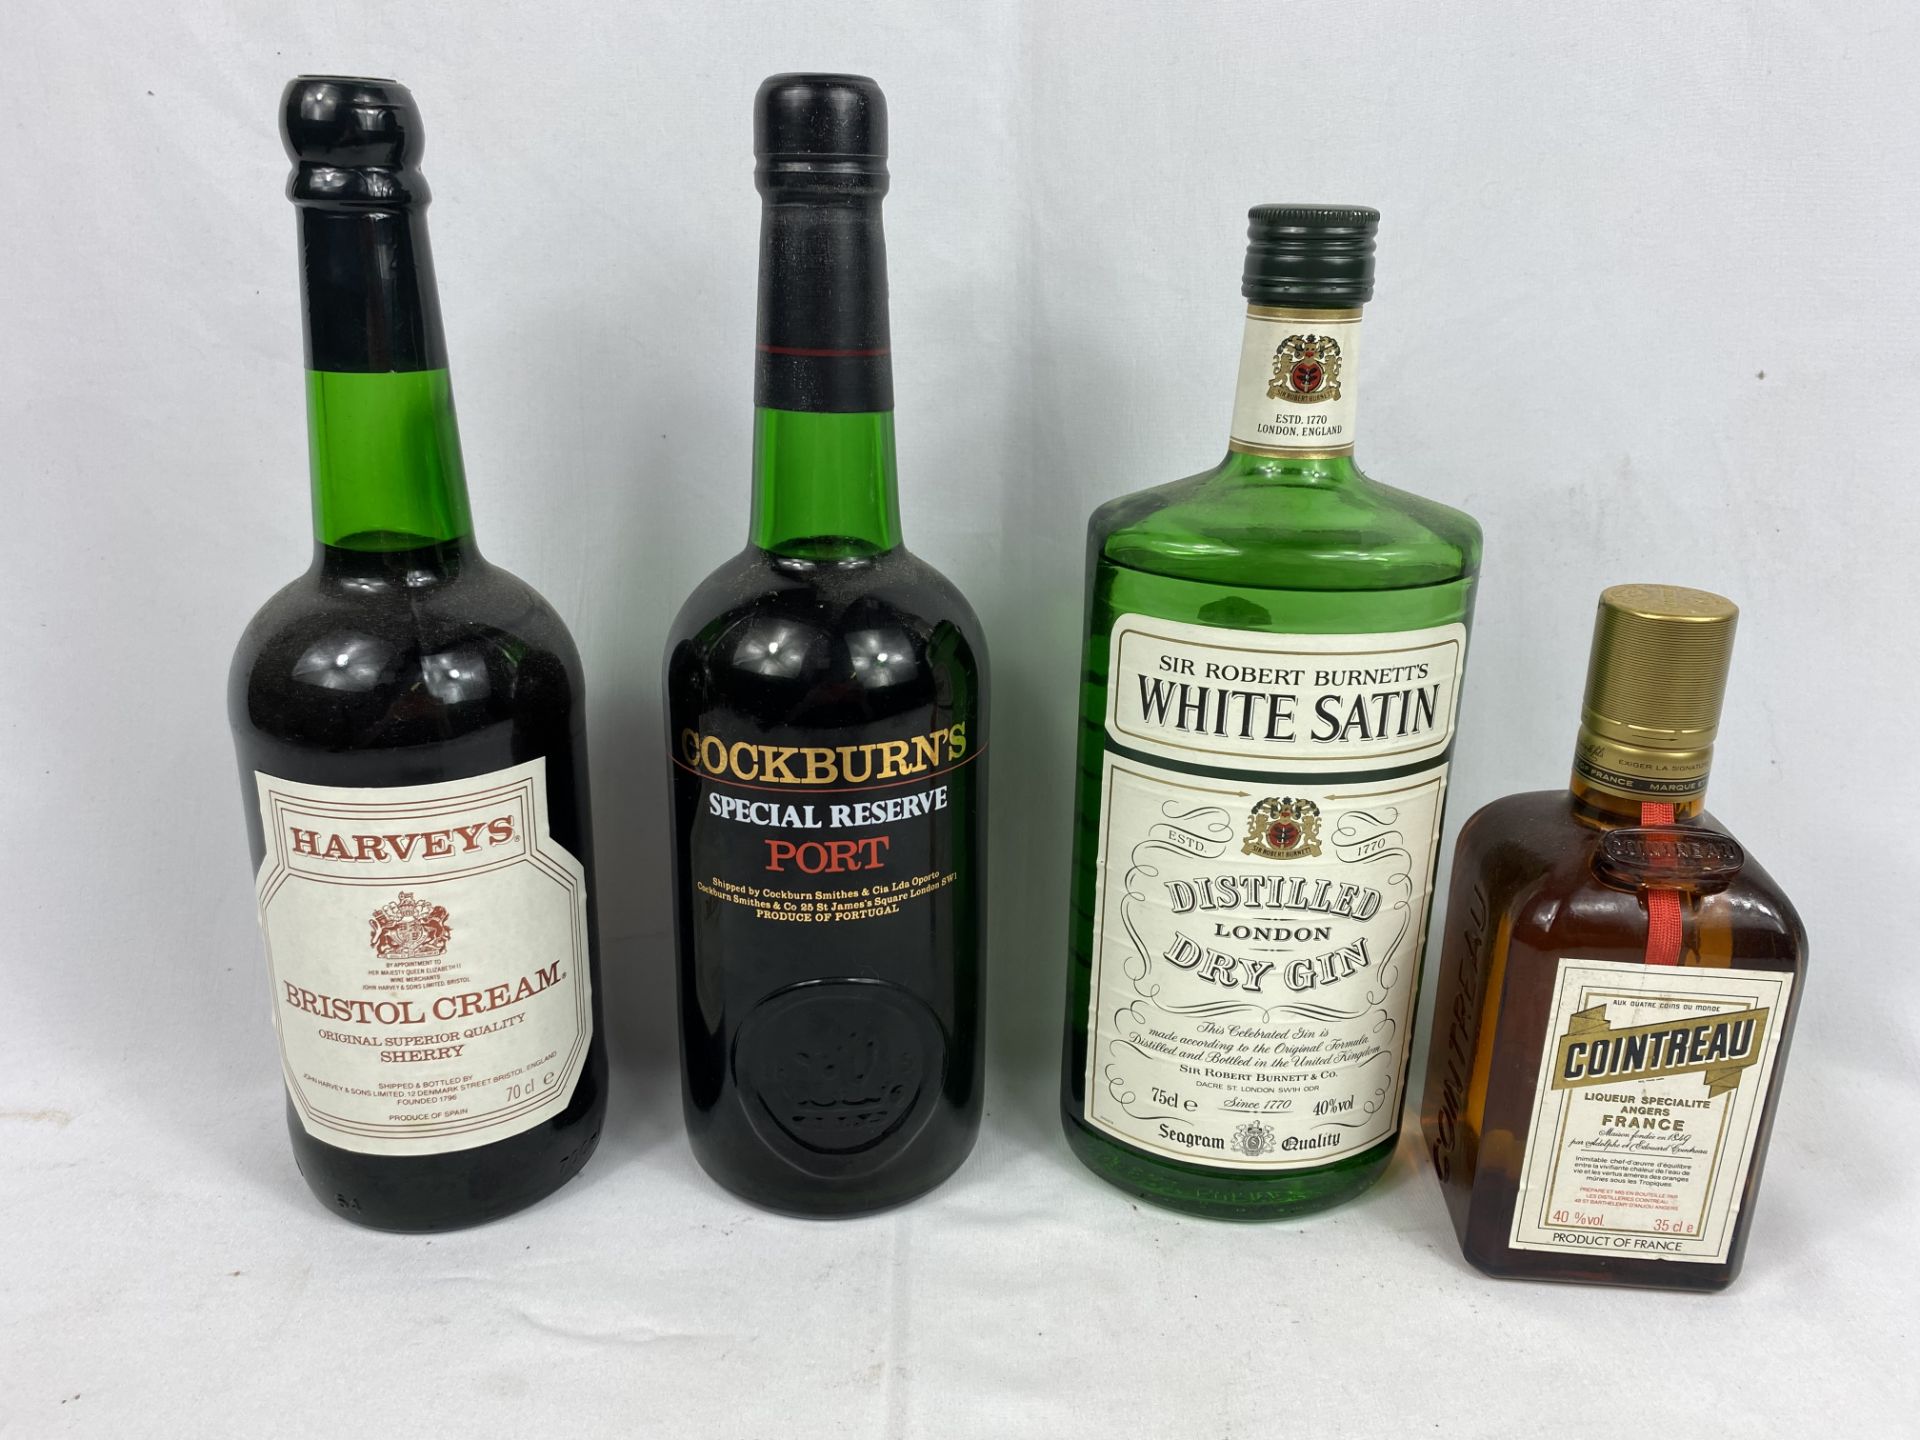 Bottle of Cockburn's Special Reserve port, a bottle of gin and two other bottles